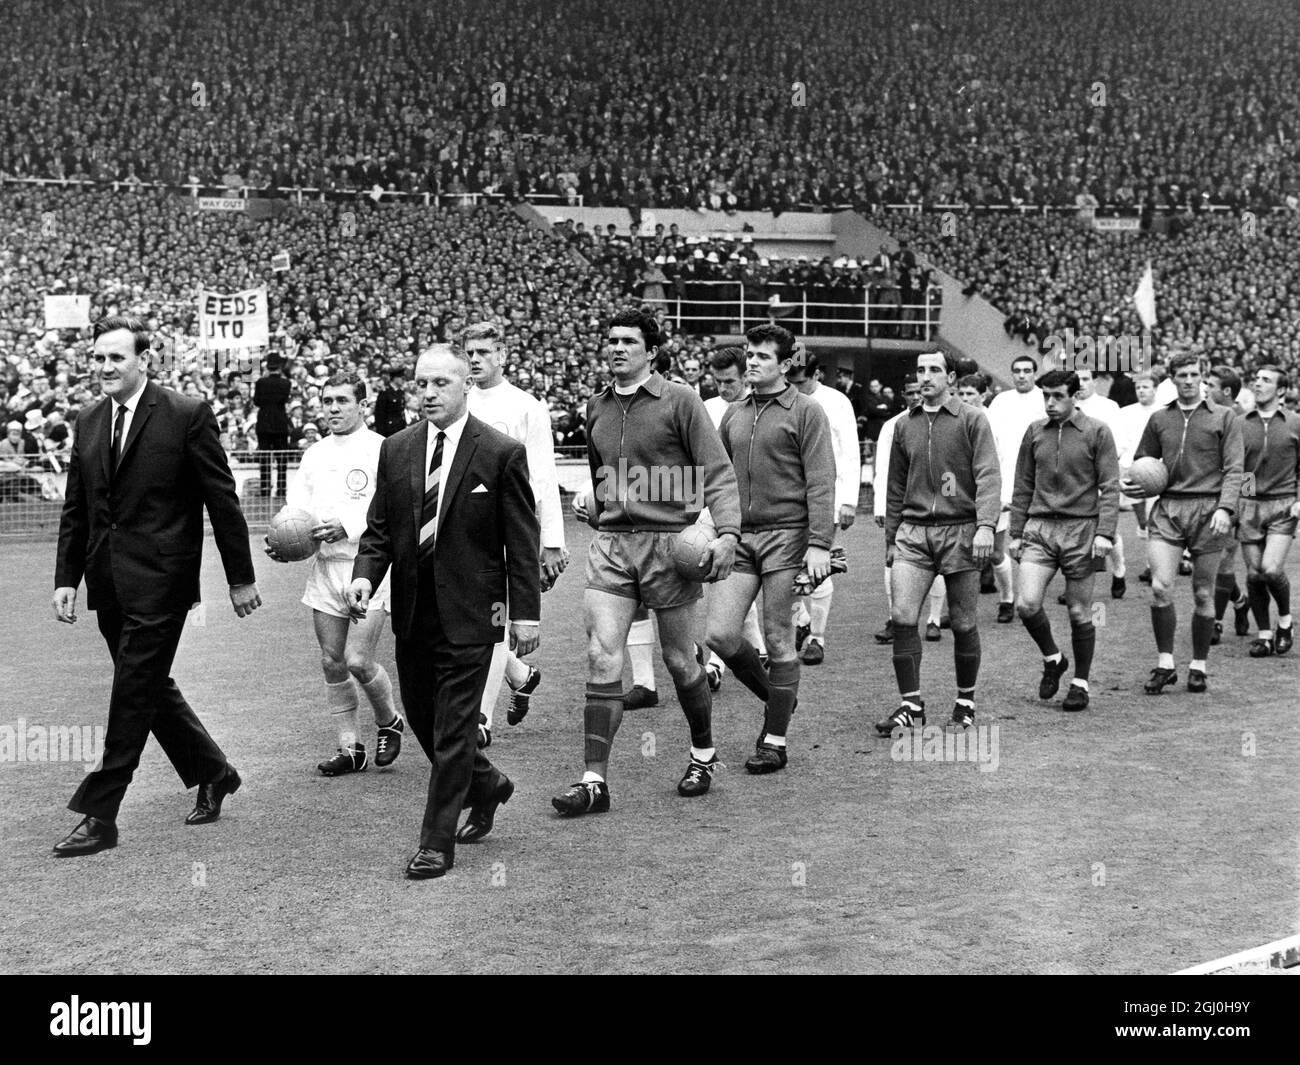 Don Revie (left) and Bill Shankly, managers of Leeds United and Liverpool lead their teams out onto the famous Wembley turf before the start of the 1965 FA Cup Final. Leeds players following behind include captain Bobby Collins and goalkeeper Gareth Sprake. Liverpool players behind Shankly are captain Ron Yeats, goalkeeper Tommy Lawrence, Gerry Byrne, Ian Callaghan, Willie Stevenson and Peter Thompson. 3rd May 1965. Stock Photo